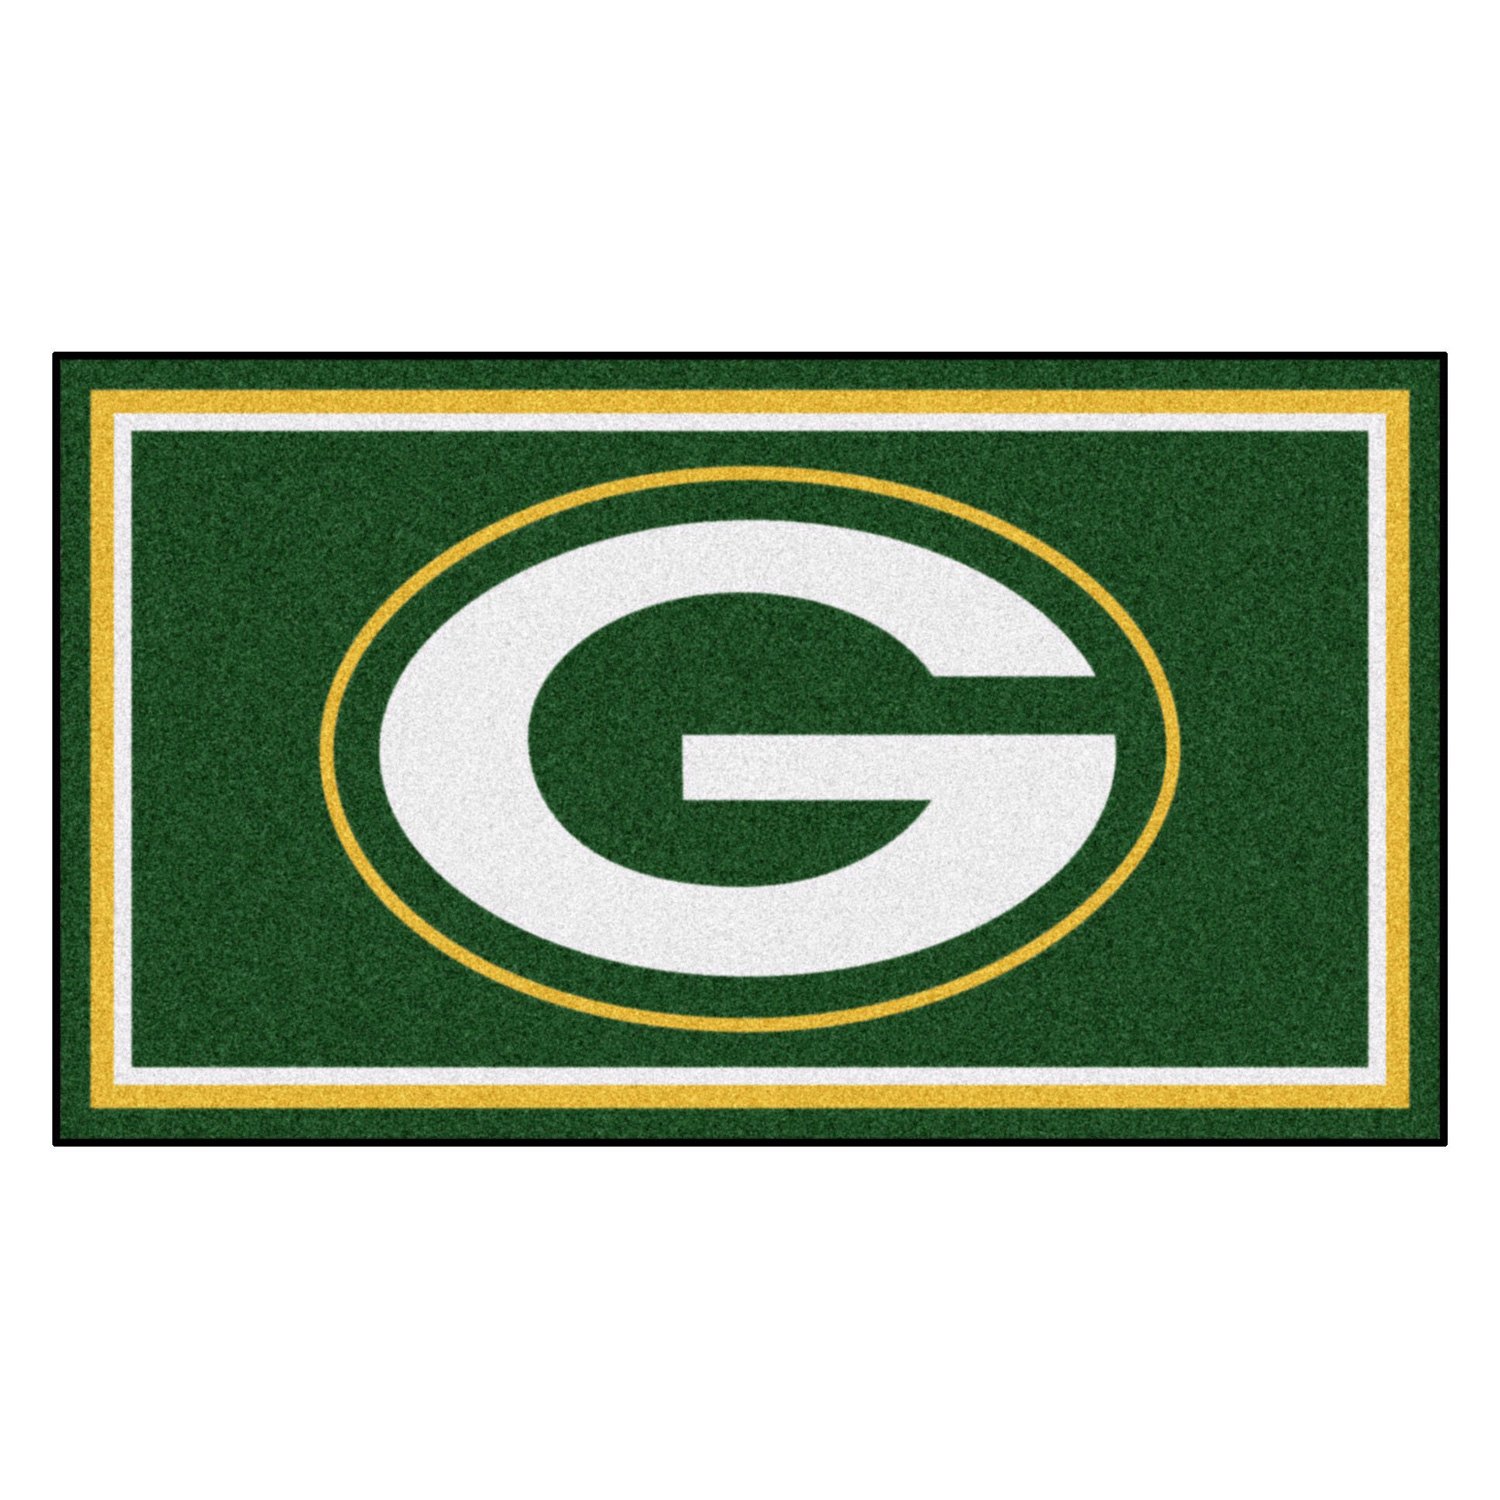 Fanmats® 19868 Green Bay Packers 36 X 60 Nylon Face Plush Floor Rug With Oval G Logo